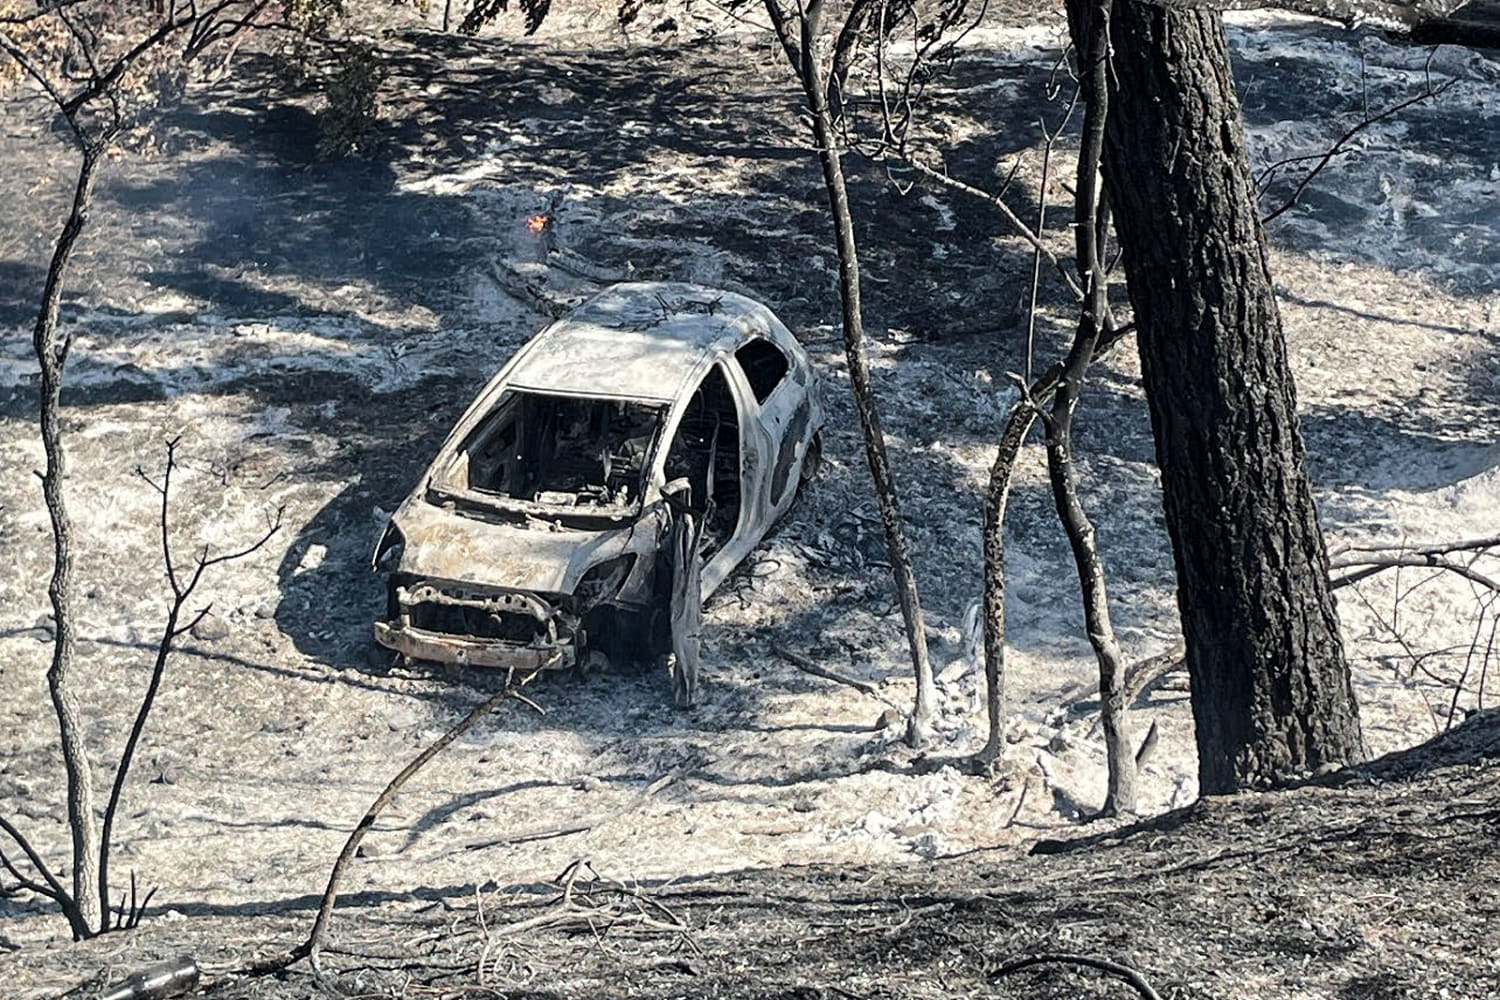 Man pushing flaming car into ravine started Park Fire, burning over 70,000 acres in California